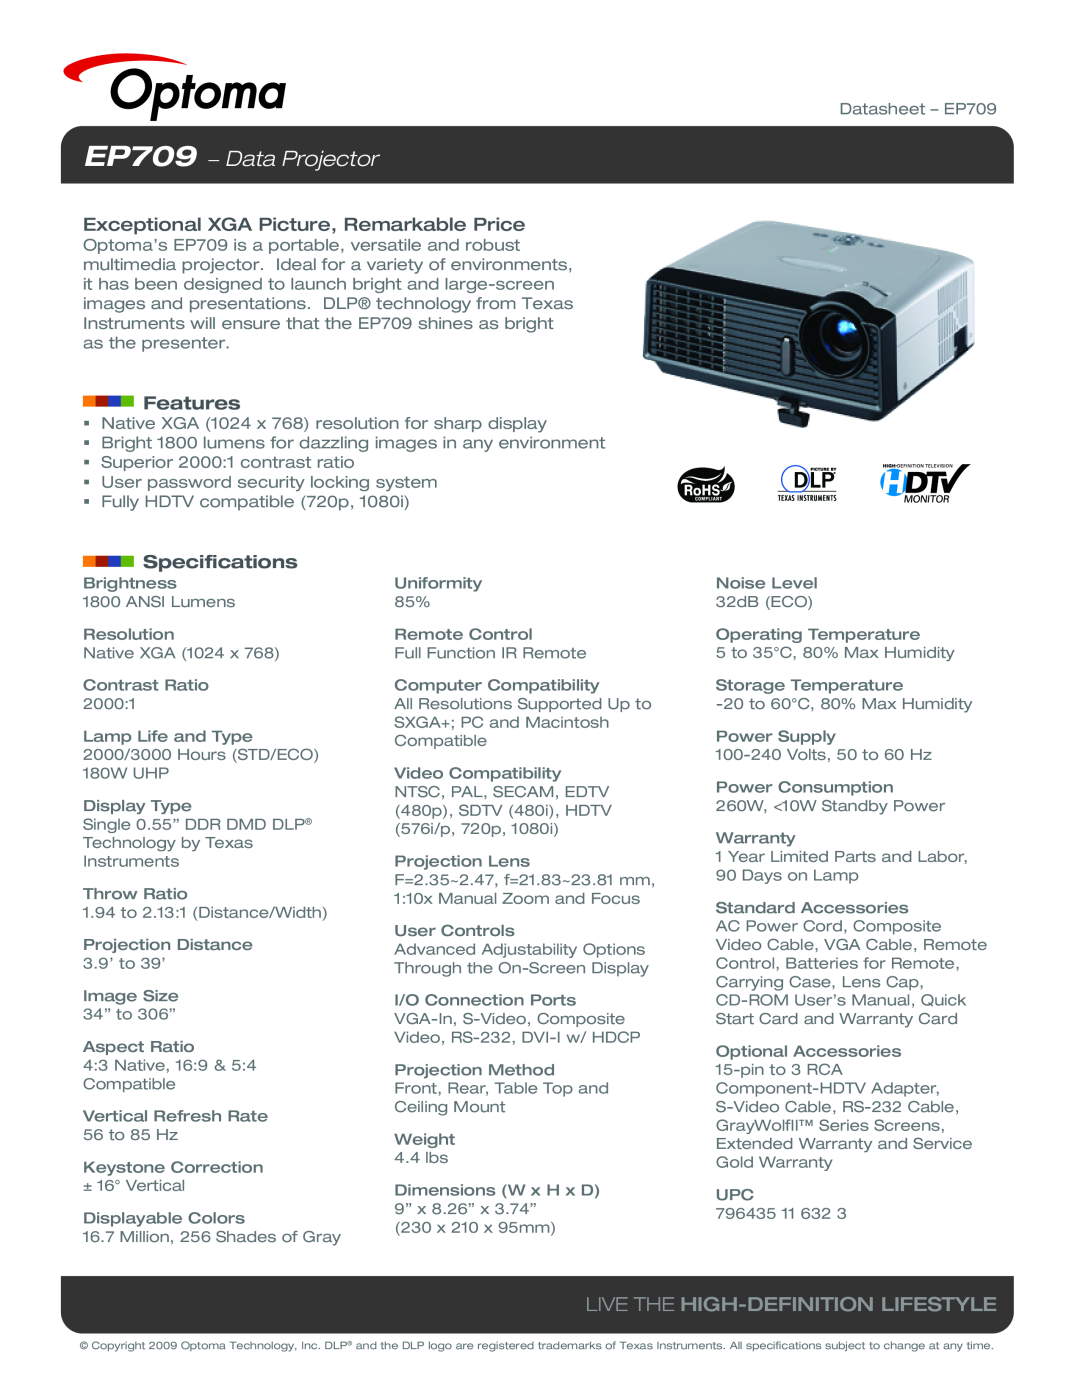 Optoma Technology specifications EP709 − Data Projector, Live The High-Definition Lifestyle, Features, Specifications 